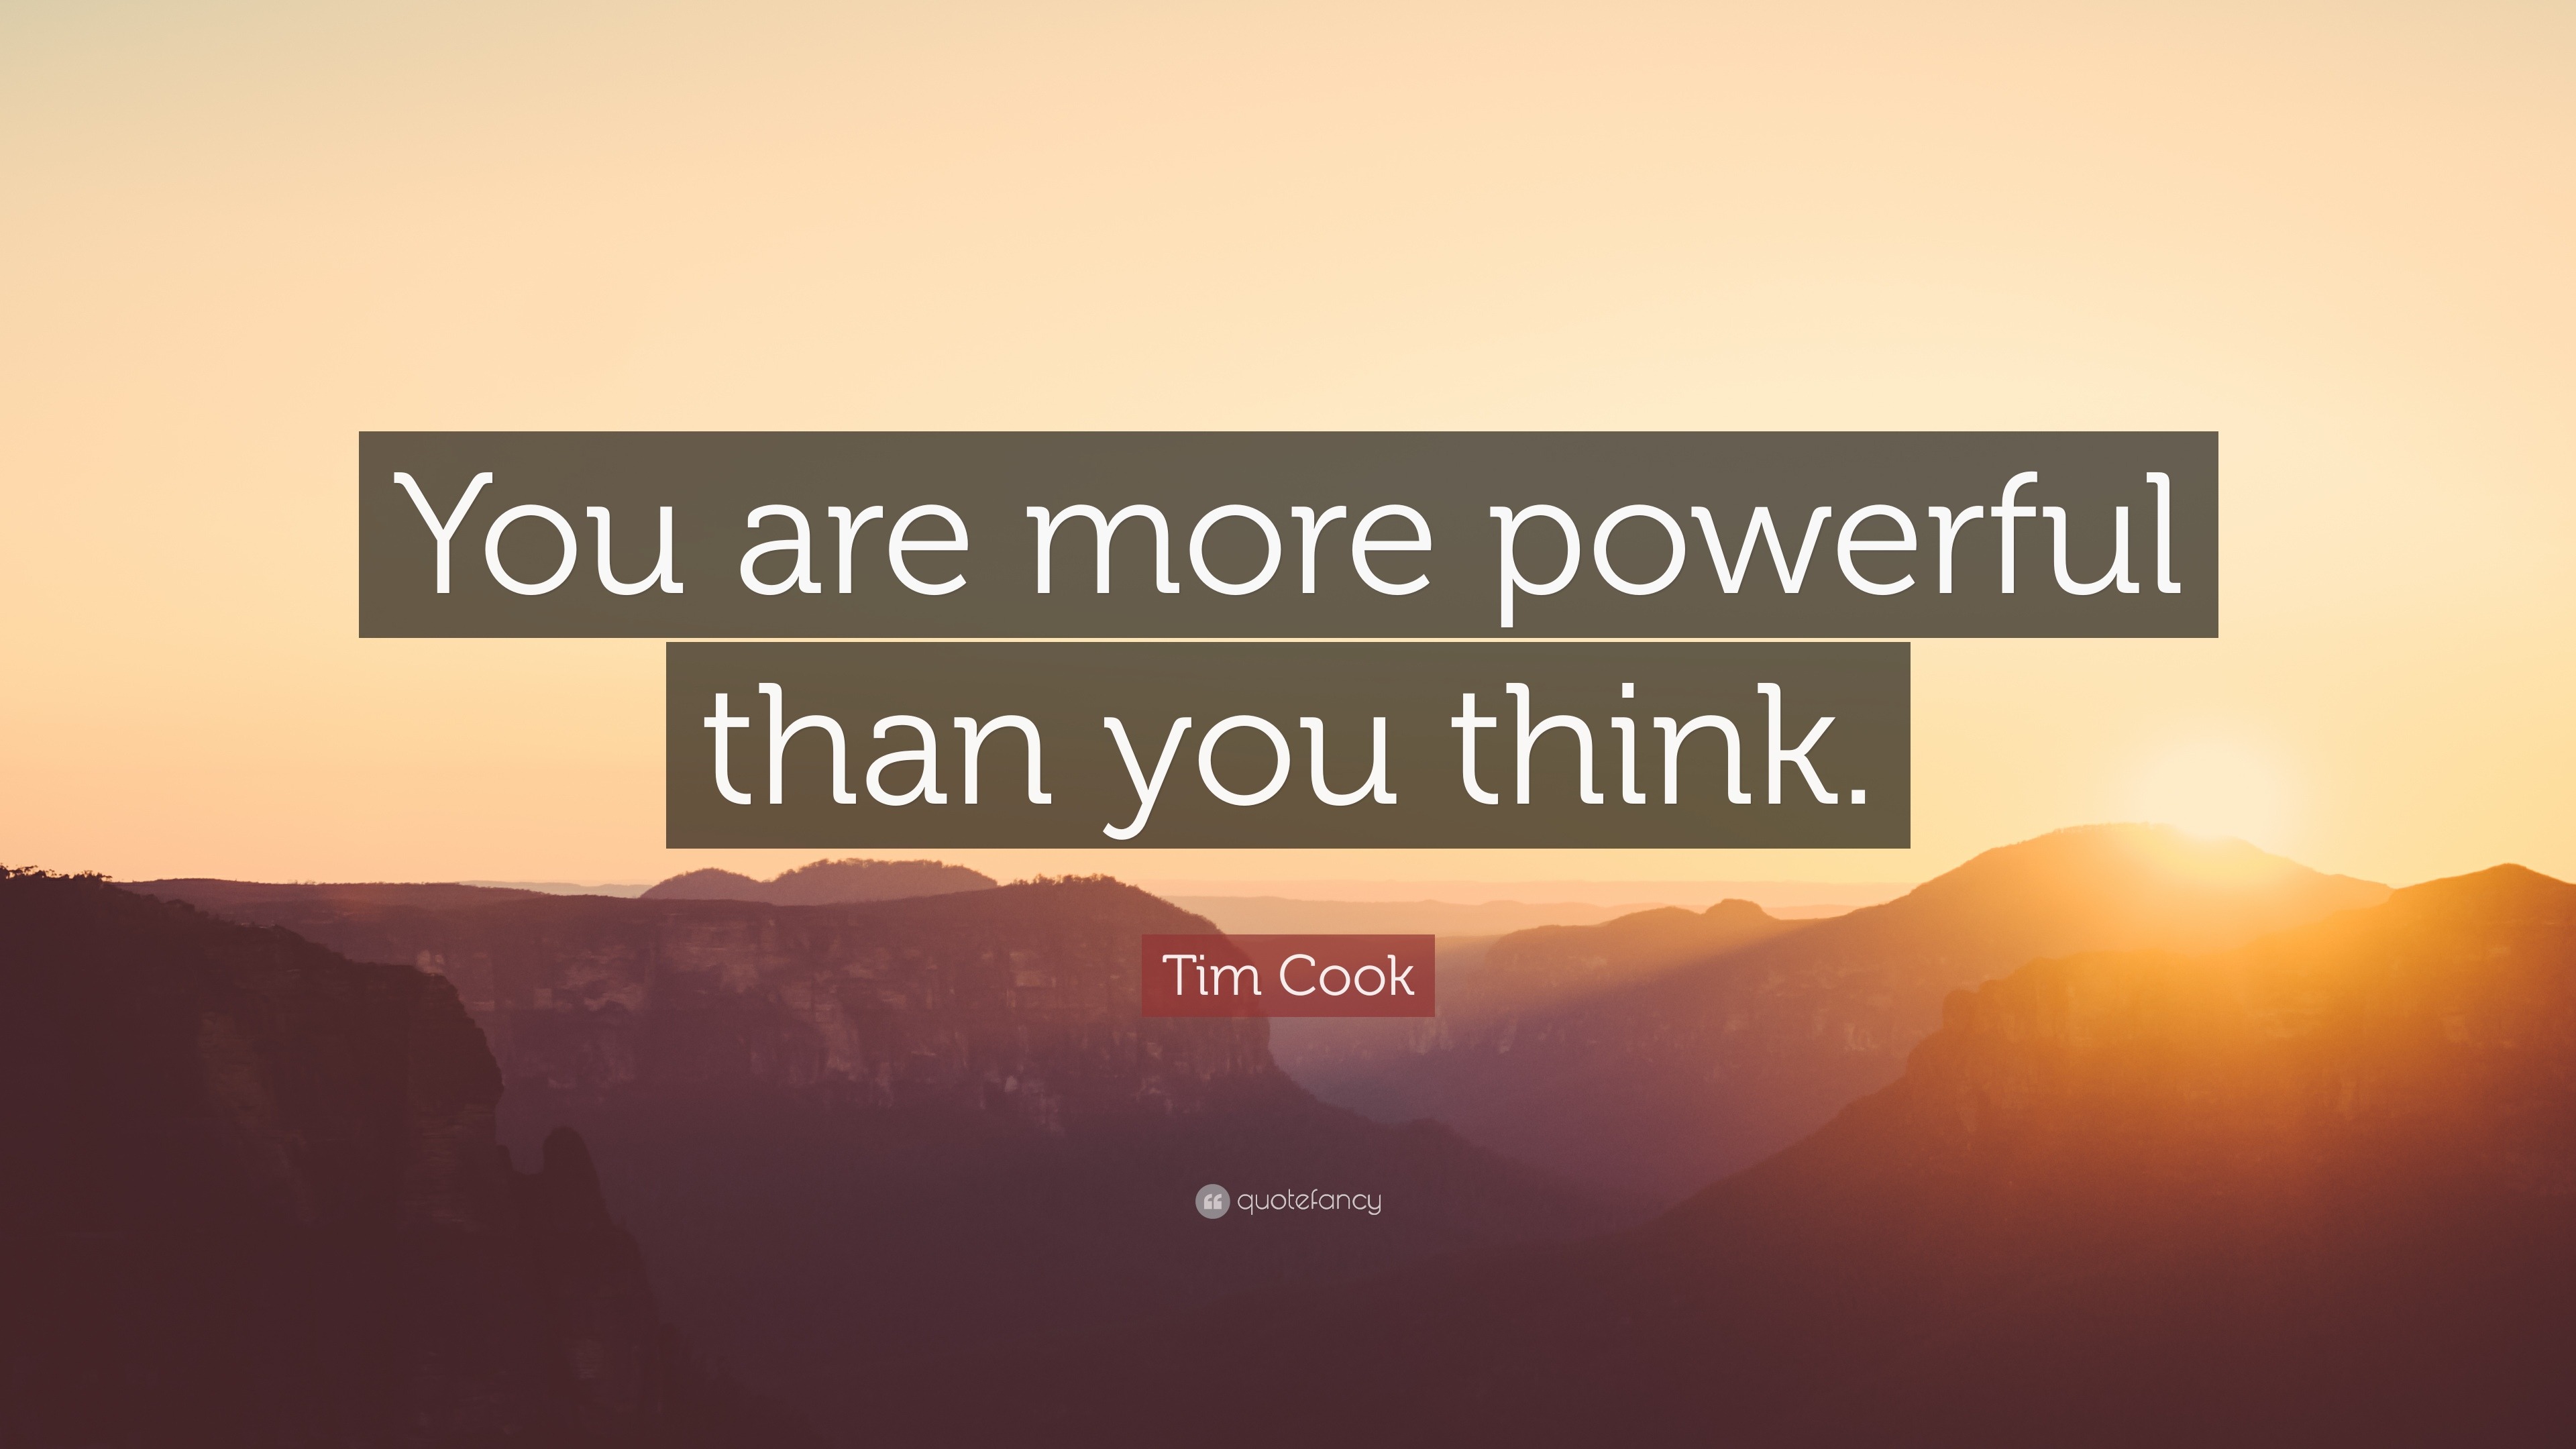 Tim Cook Quote  You are more powerful  than you think  9 